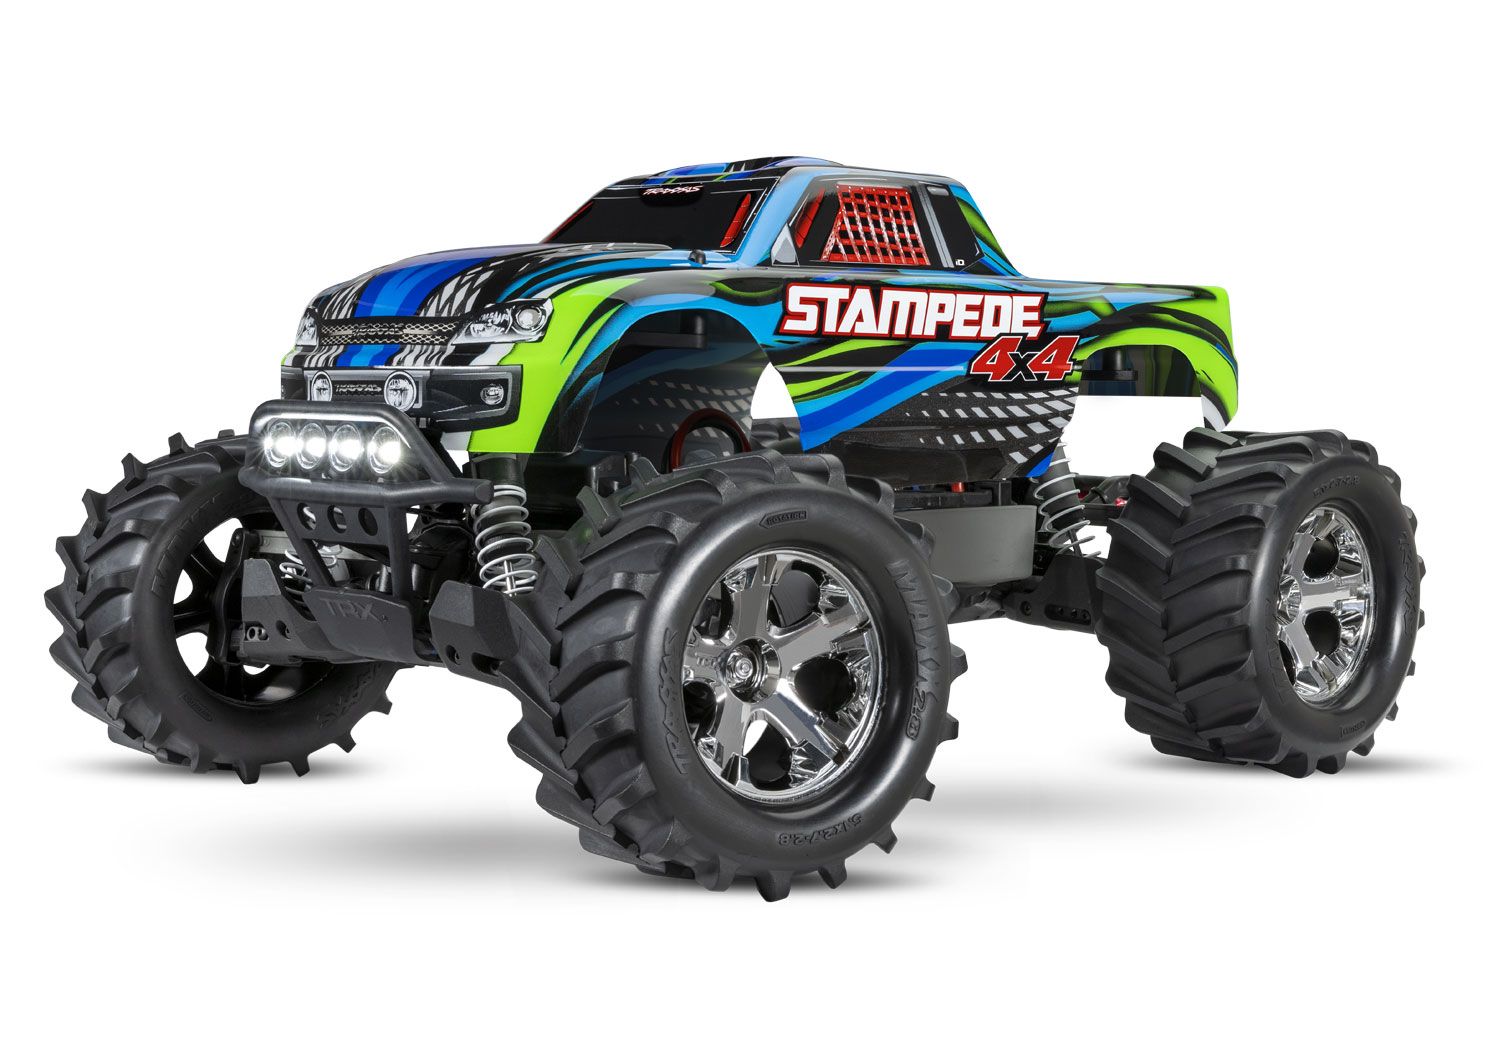 TRAXXAS 67054-61 Stampede 4X4 1/10 4WD monster truck RTR, with TQ 2.4GHz radio, XL-5 ESC, 8.4V NiMH 3000mAh battery, 4-amp DC Fast Charger, LED lighting.